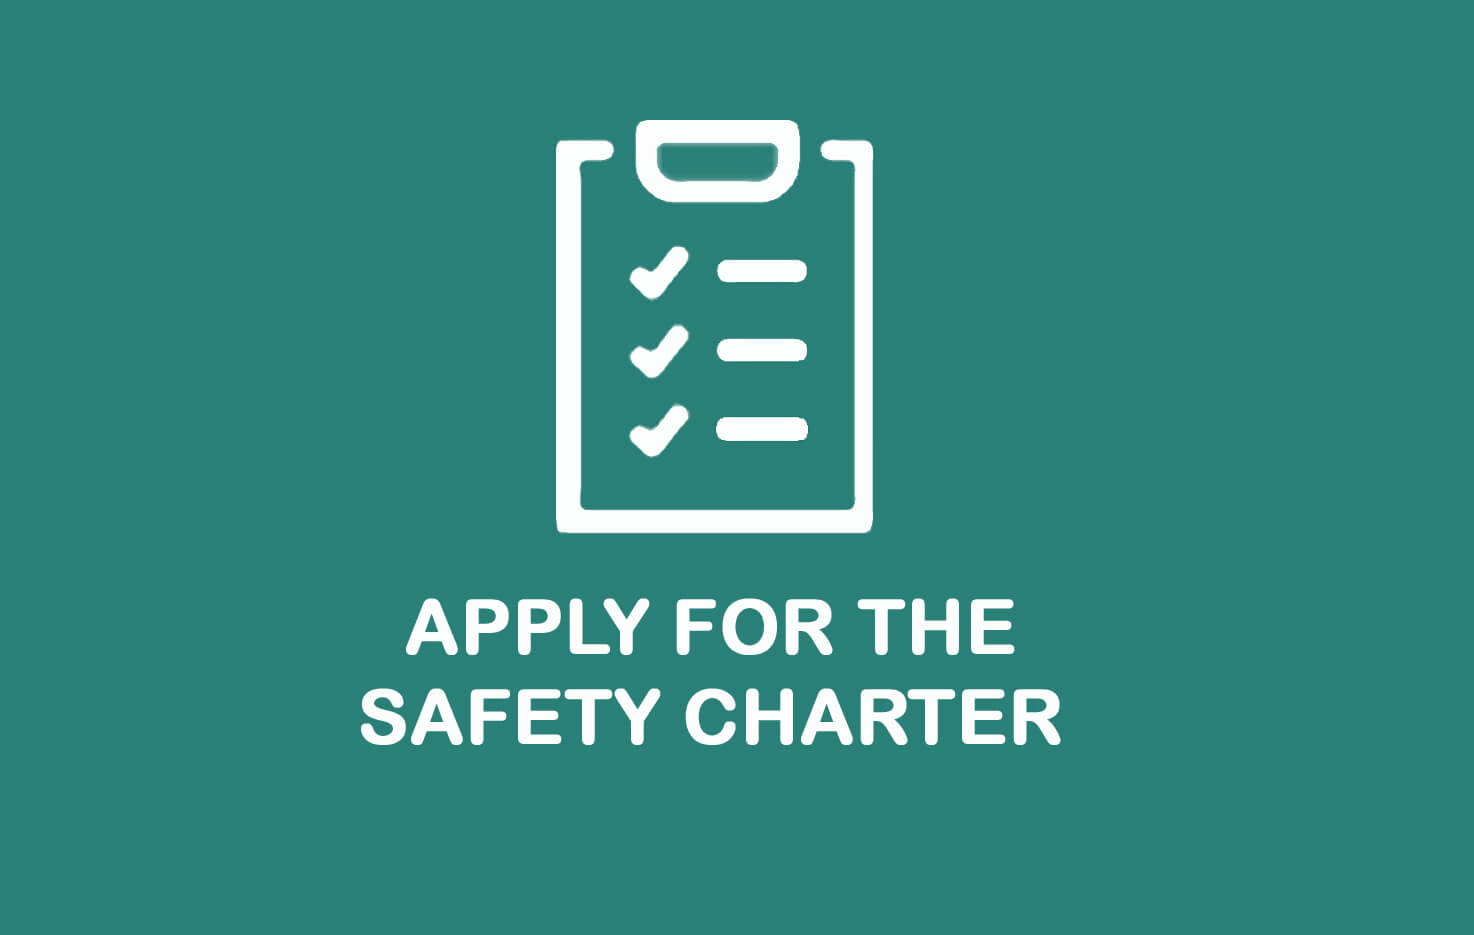 COVID-19 Safety Charter